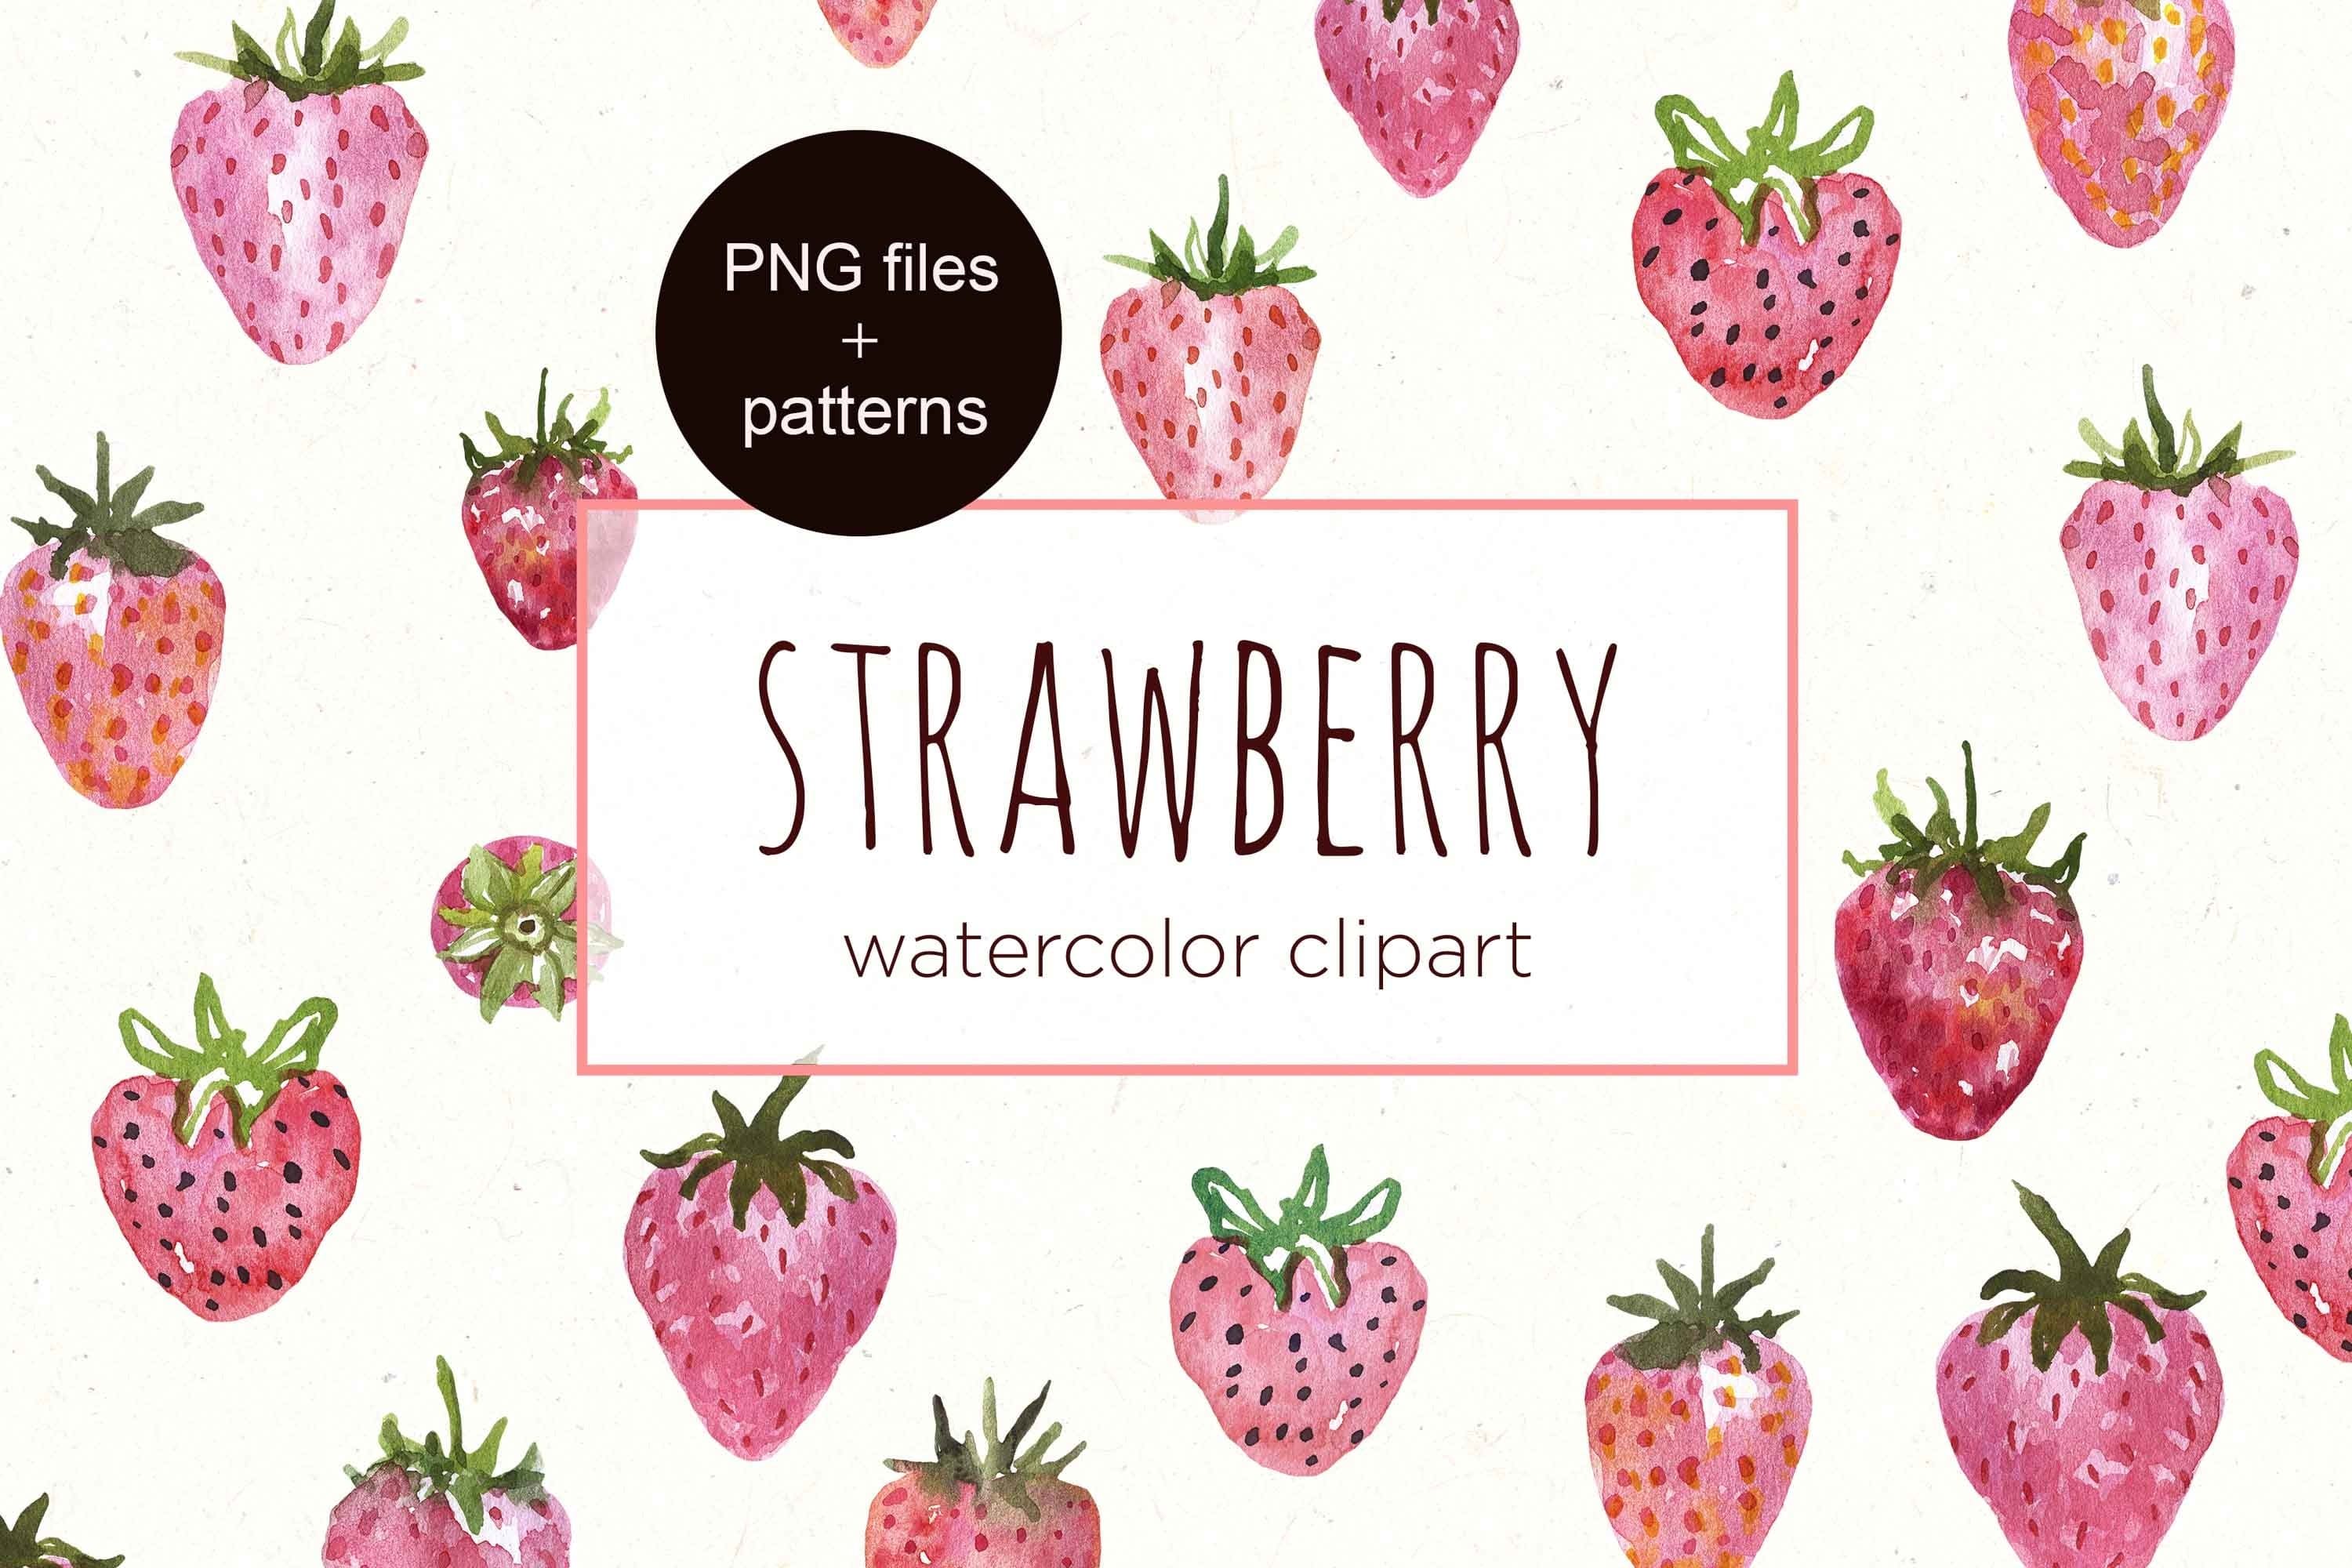 Single strawberries are drawn in watercolor with sepals.